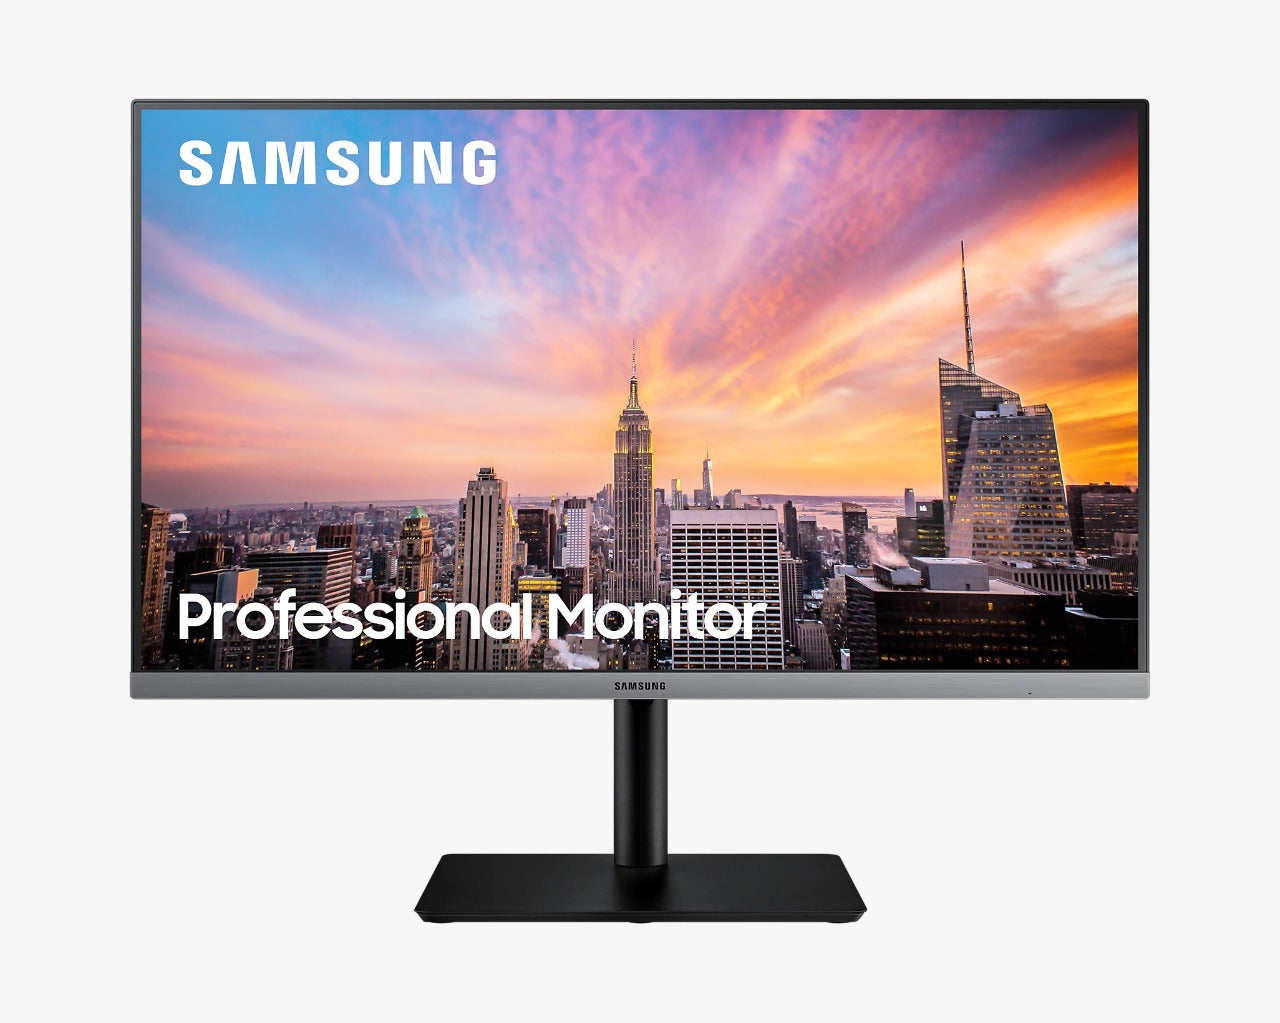 Samsung 68.6cm (27") Business Monitor with Bezel-less design